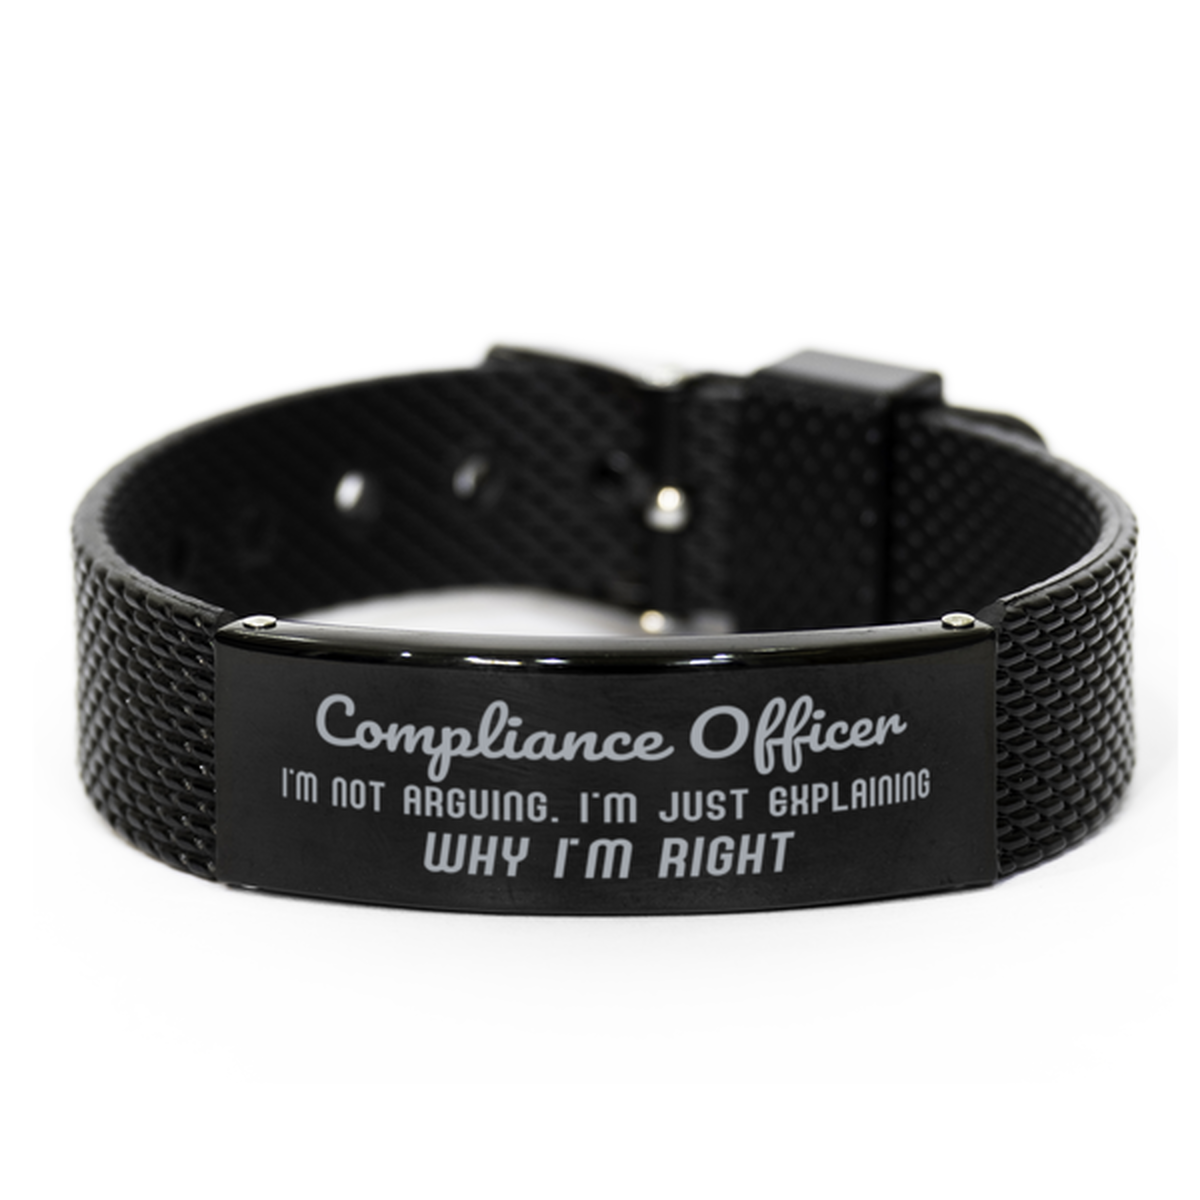 Compliance Officer I'm not Arguing. I'm Just Explaining Why I'm RIGHT Black Shark Mesh Bracelet, Funny Saying Quote Compliance Officer Gifts For Compliance Officer Graduation Birthday Christmas Gifts for Men Women Coworker